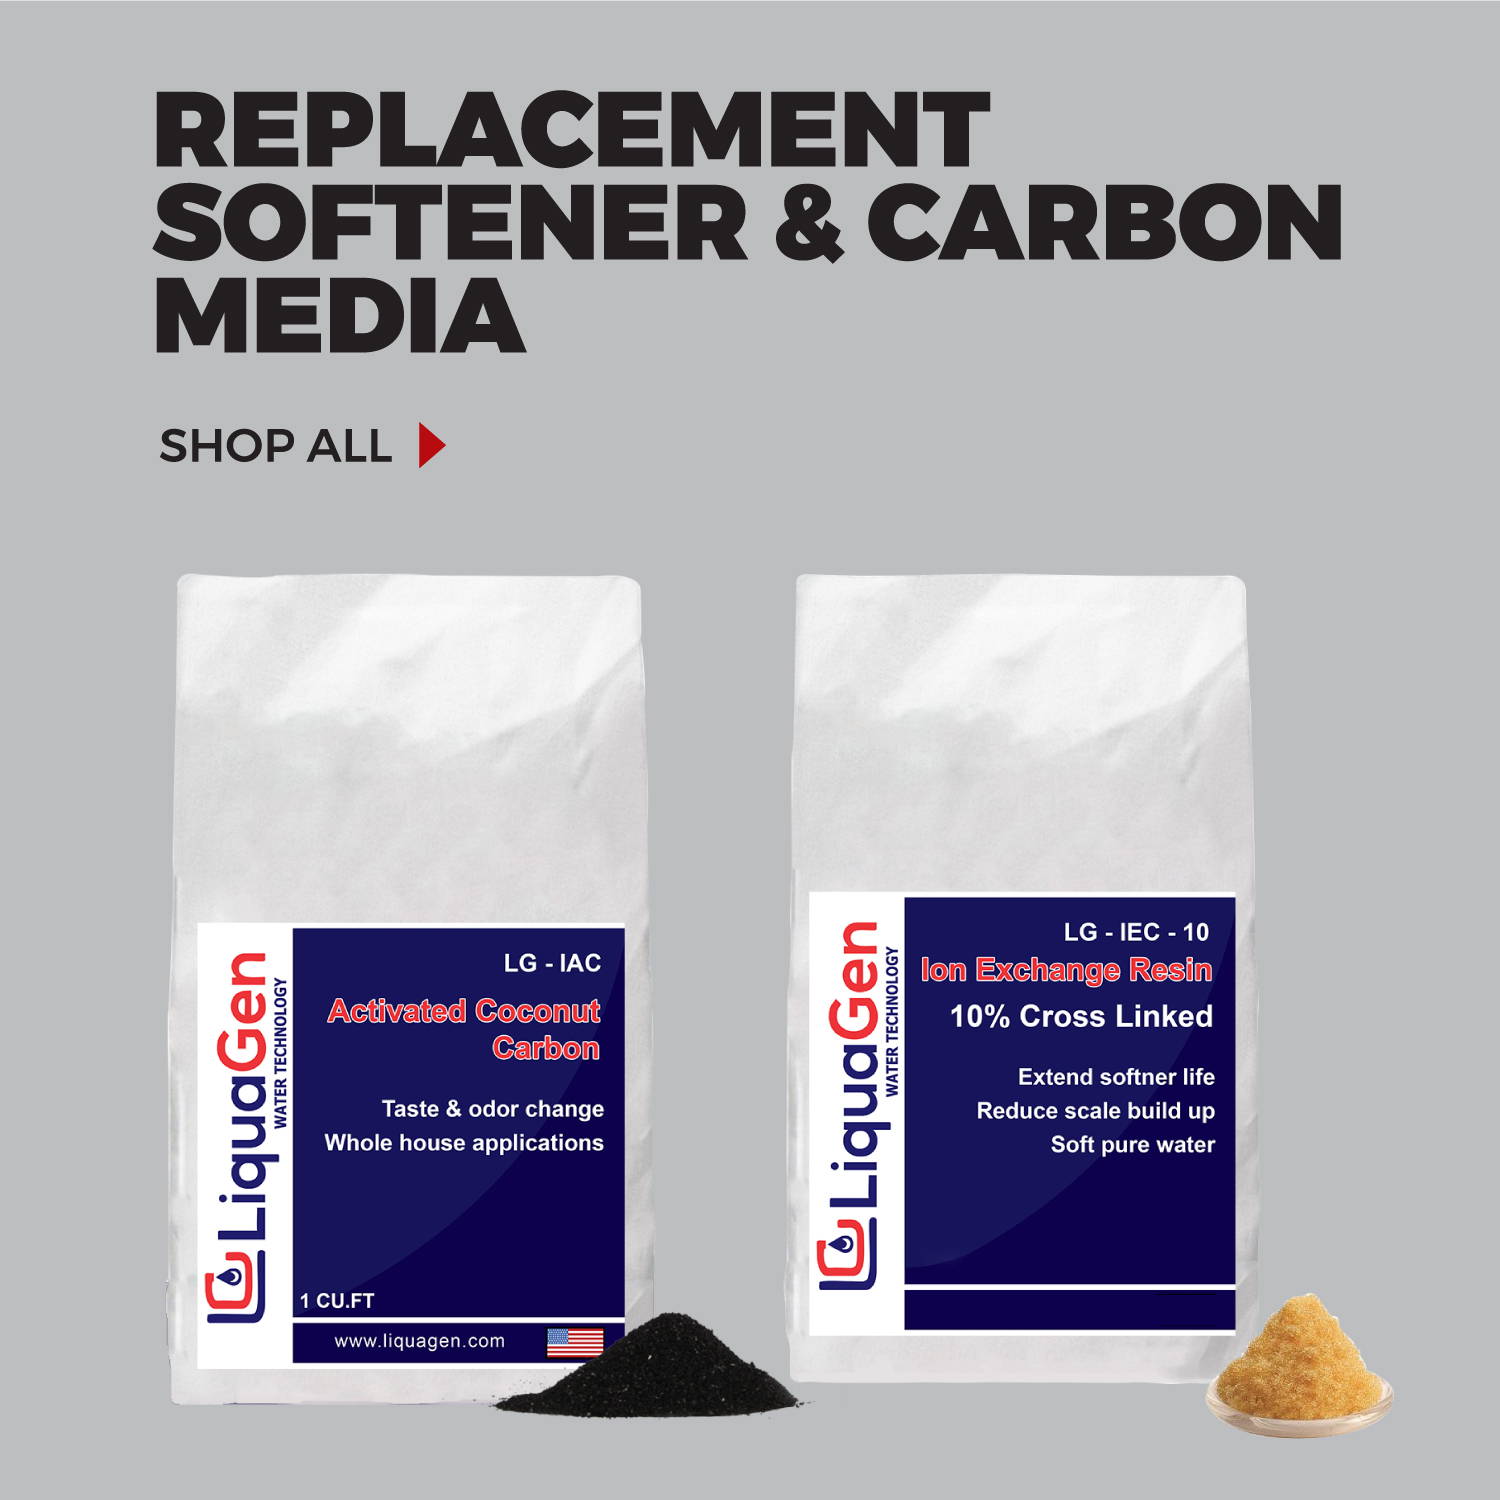 Replacement softener and carbon media